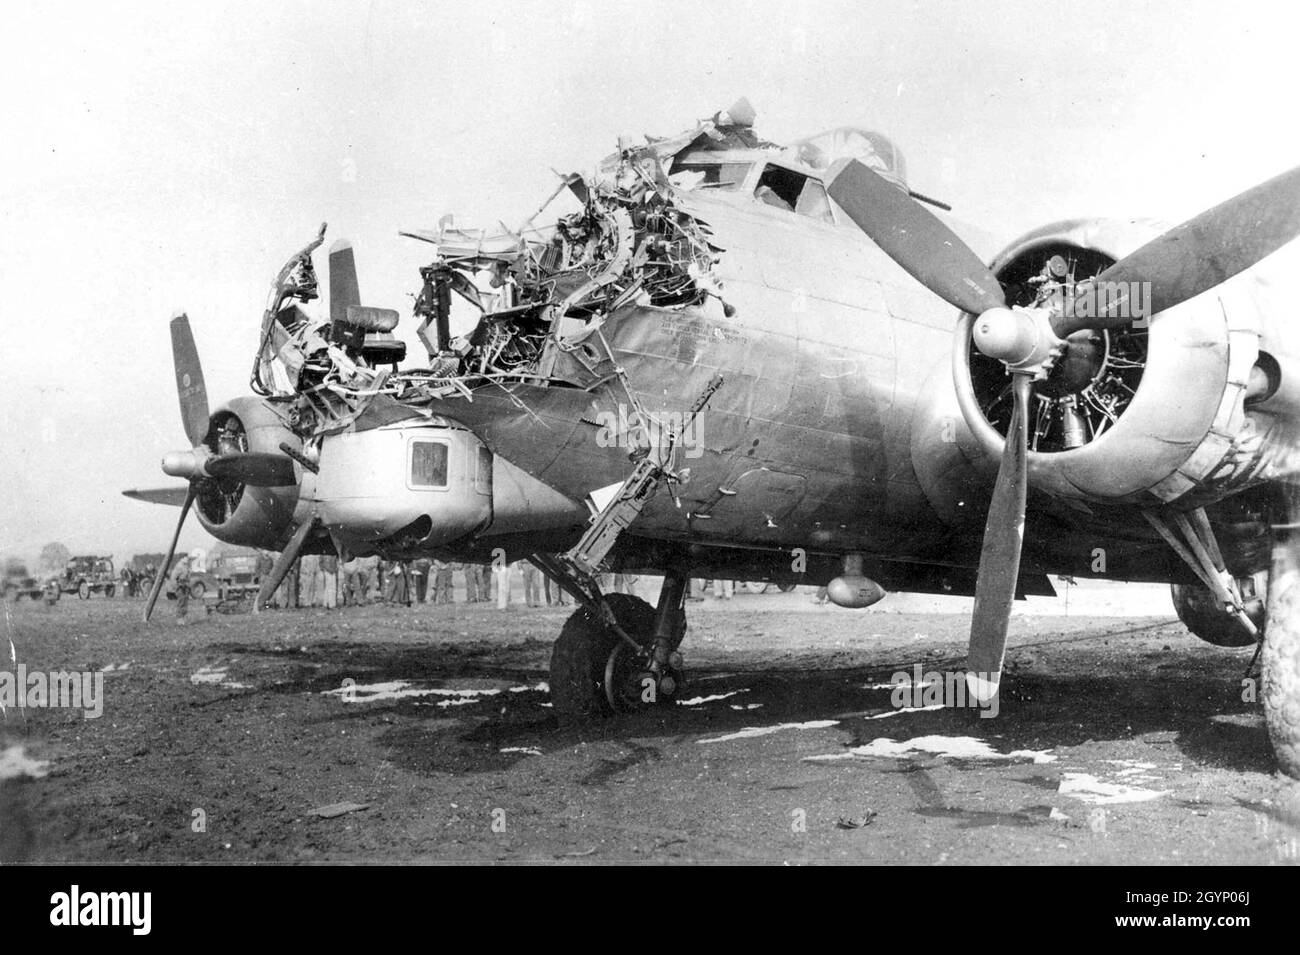 Flak damage completely destroyed the nose section of this Boeing B-17G, a 398th Bomb Group aircraft flown by 1Lt. Lawrence M. Delancey over Cologne, Germany. Stock Photo